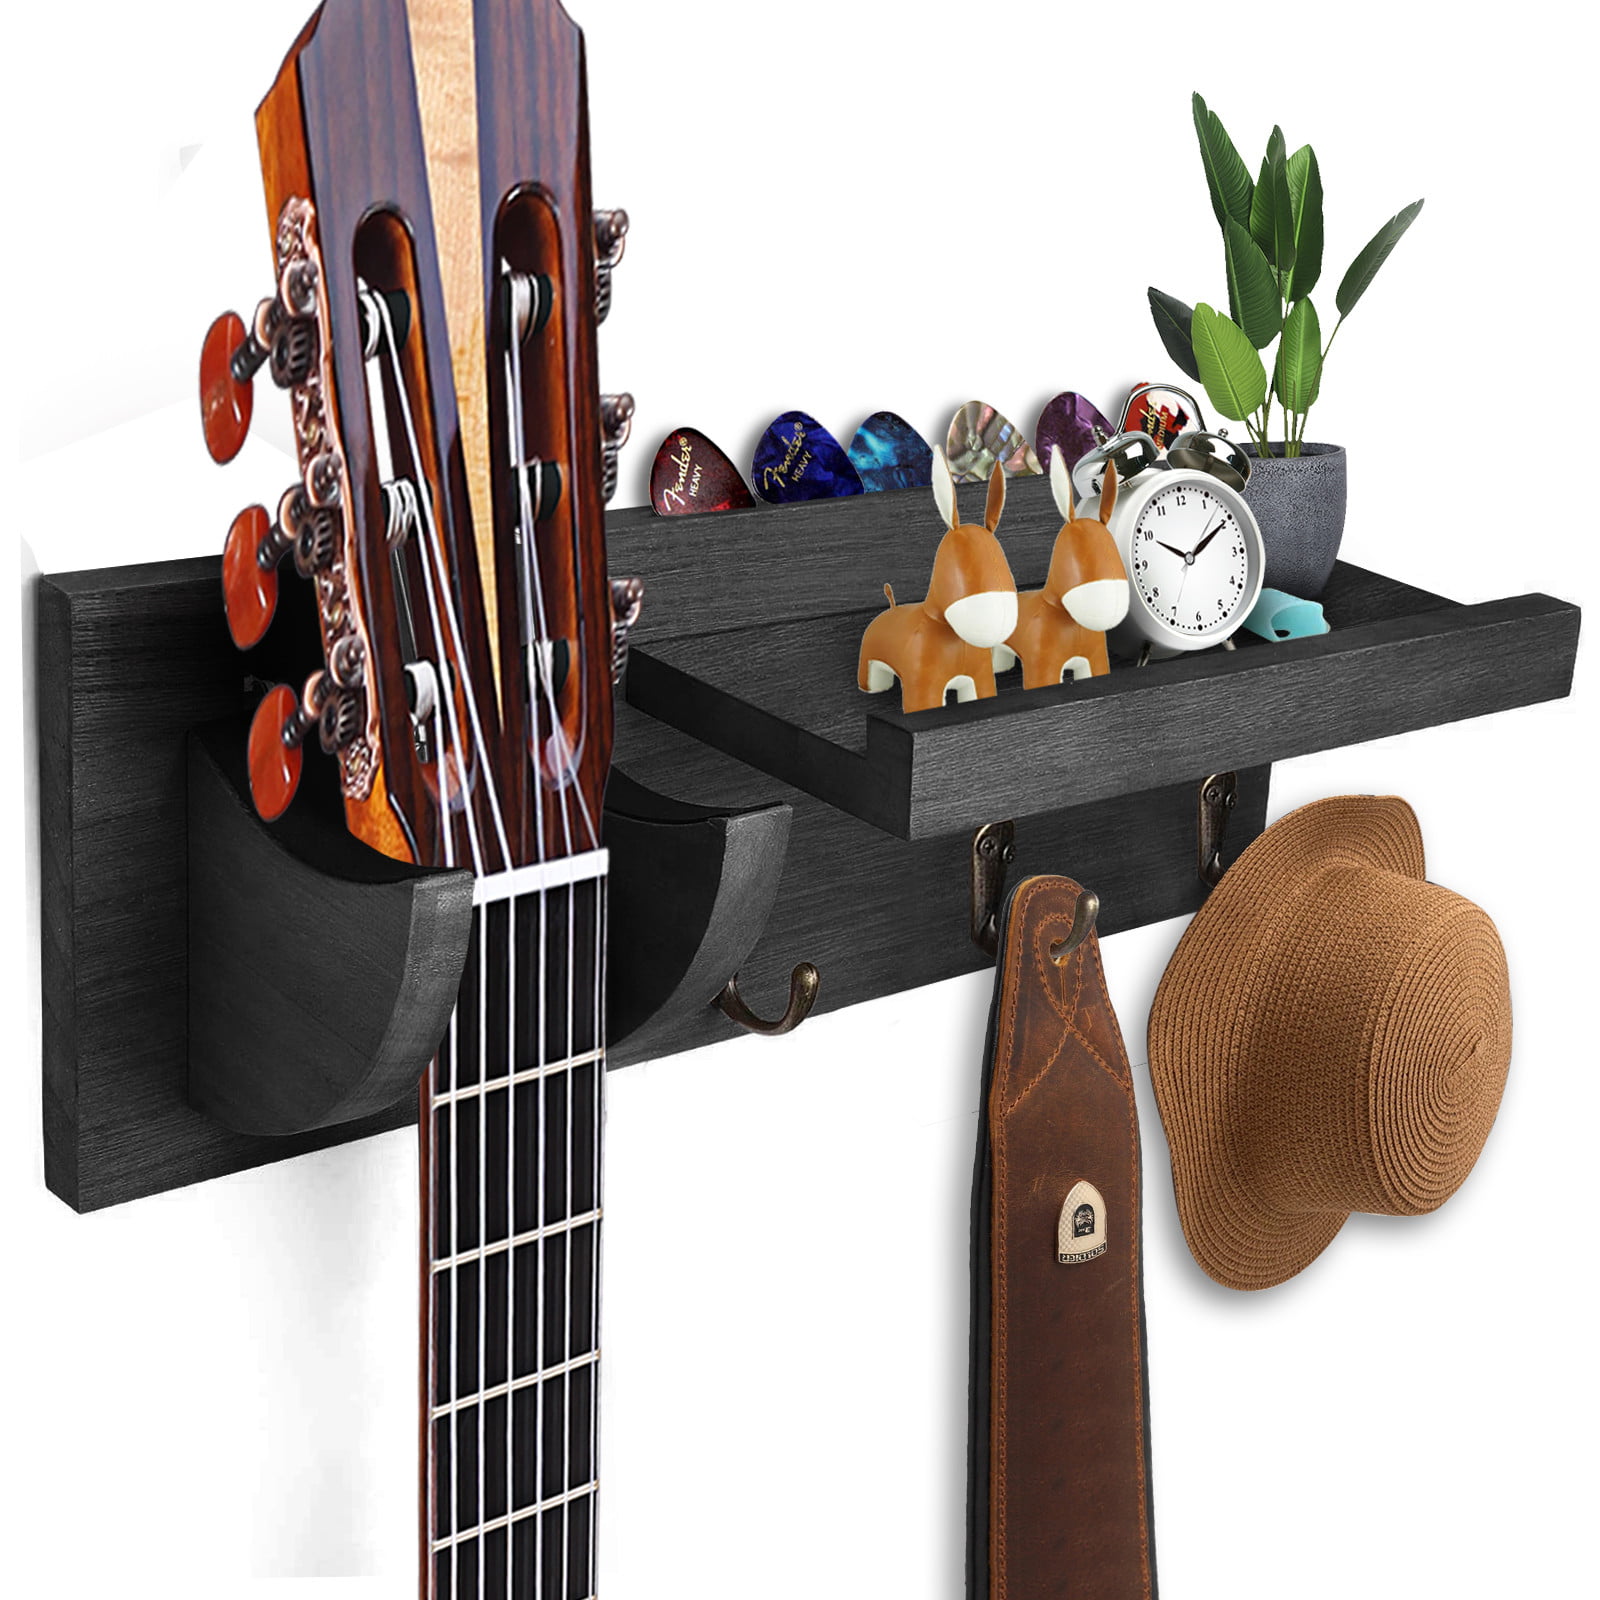 Black CABINAHOME Guitar Wall Holder stands hangers for Acoustic and Electric Guitar wood Hanging Rack with Pick Holder and 3 Hook